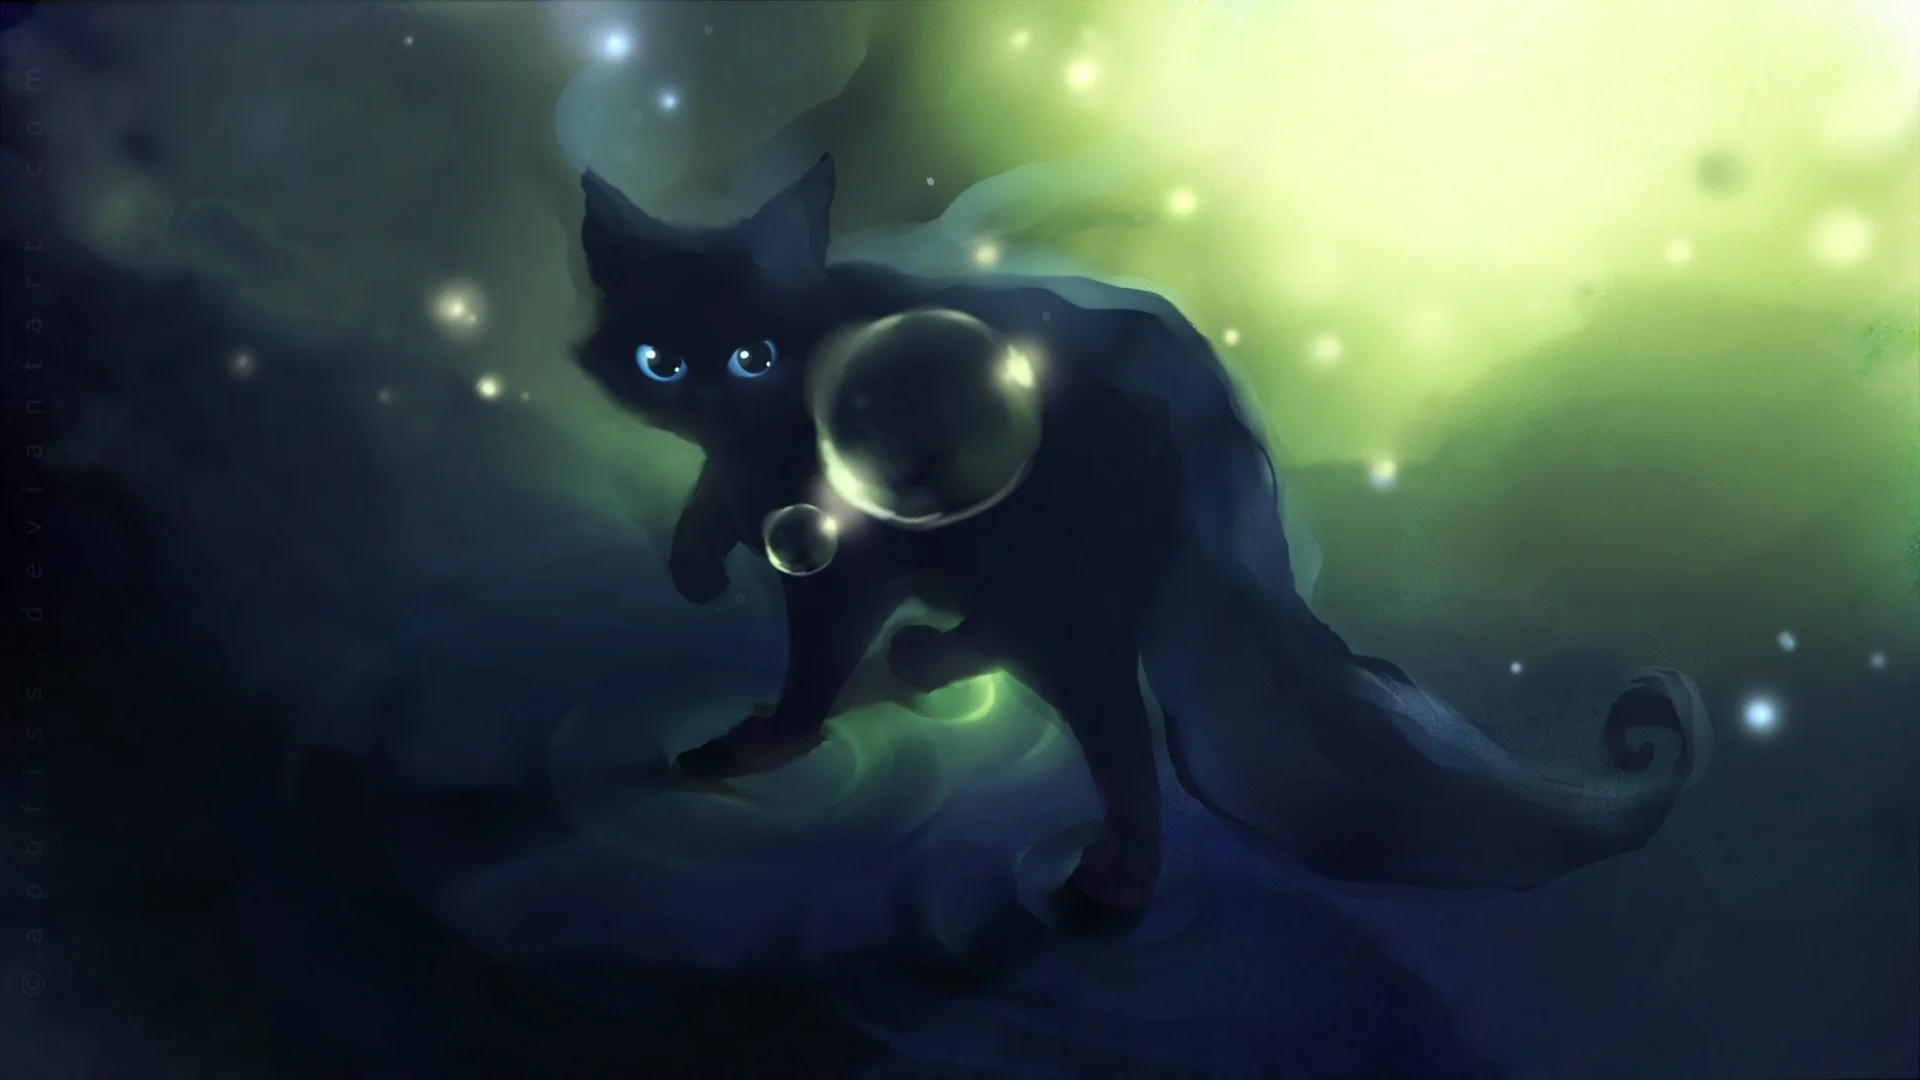 Heart touching Cuties and Kittens Speed Painting by Apofiss – Mysterious demon cat , Amazing Little Kitty Illustrations Wallpaper 17